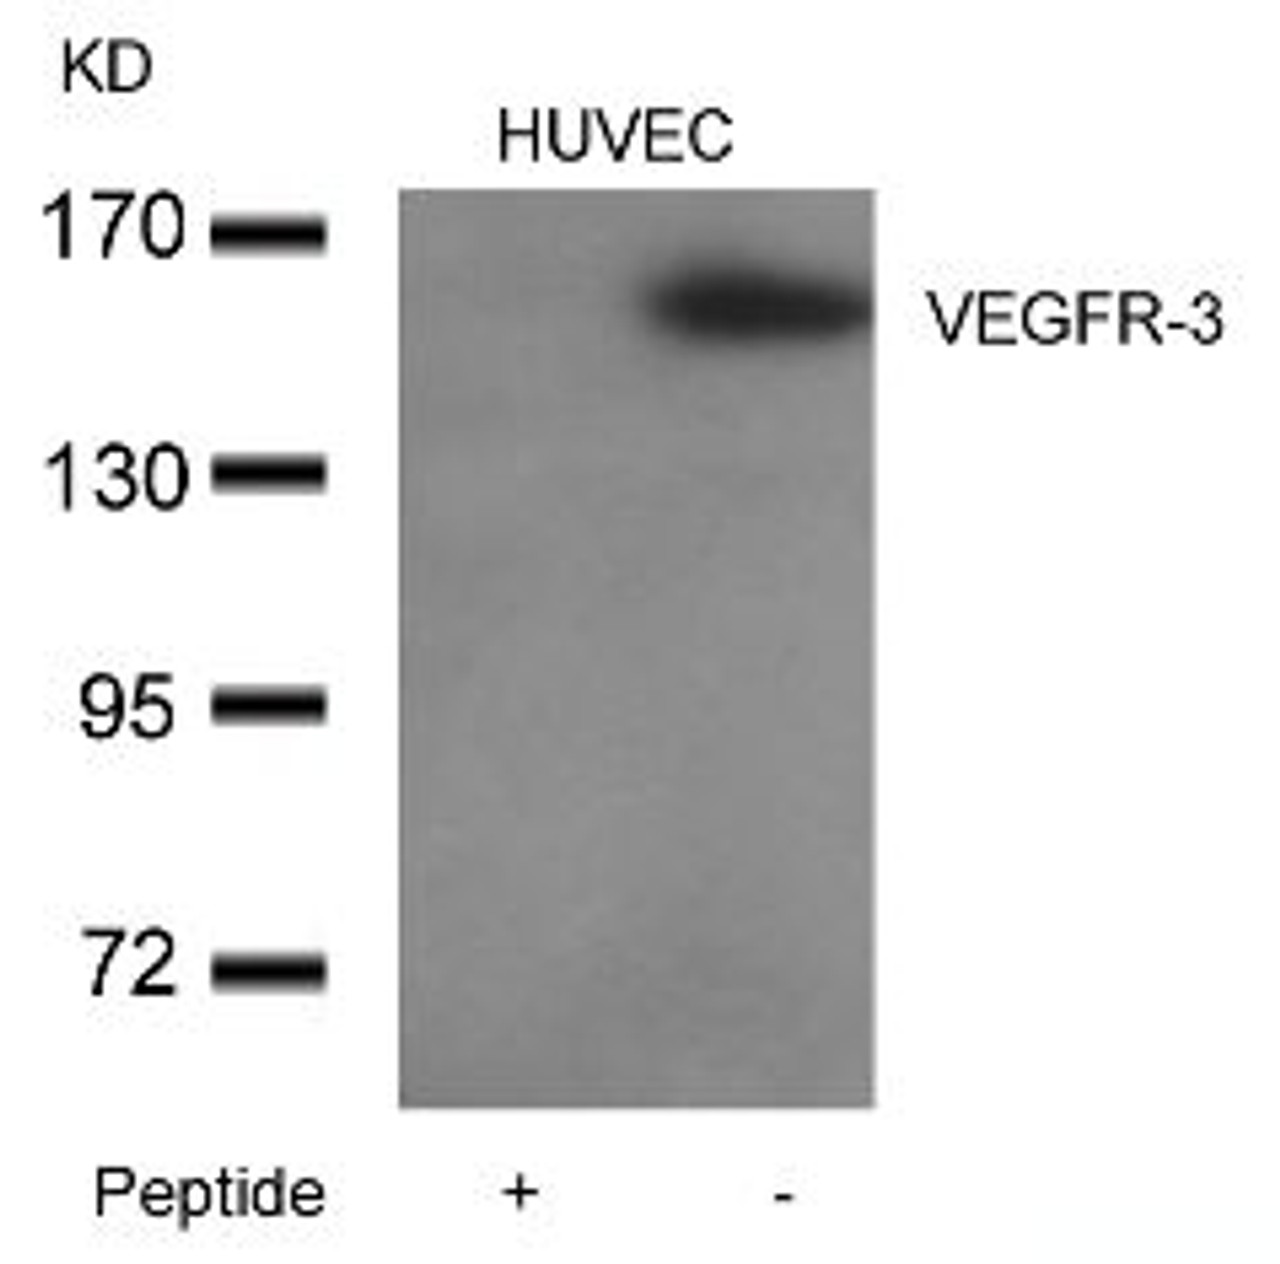 Western blot analysis of lysed extracts from HUVEC cells using VEGFR-3 Antibody.